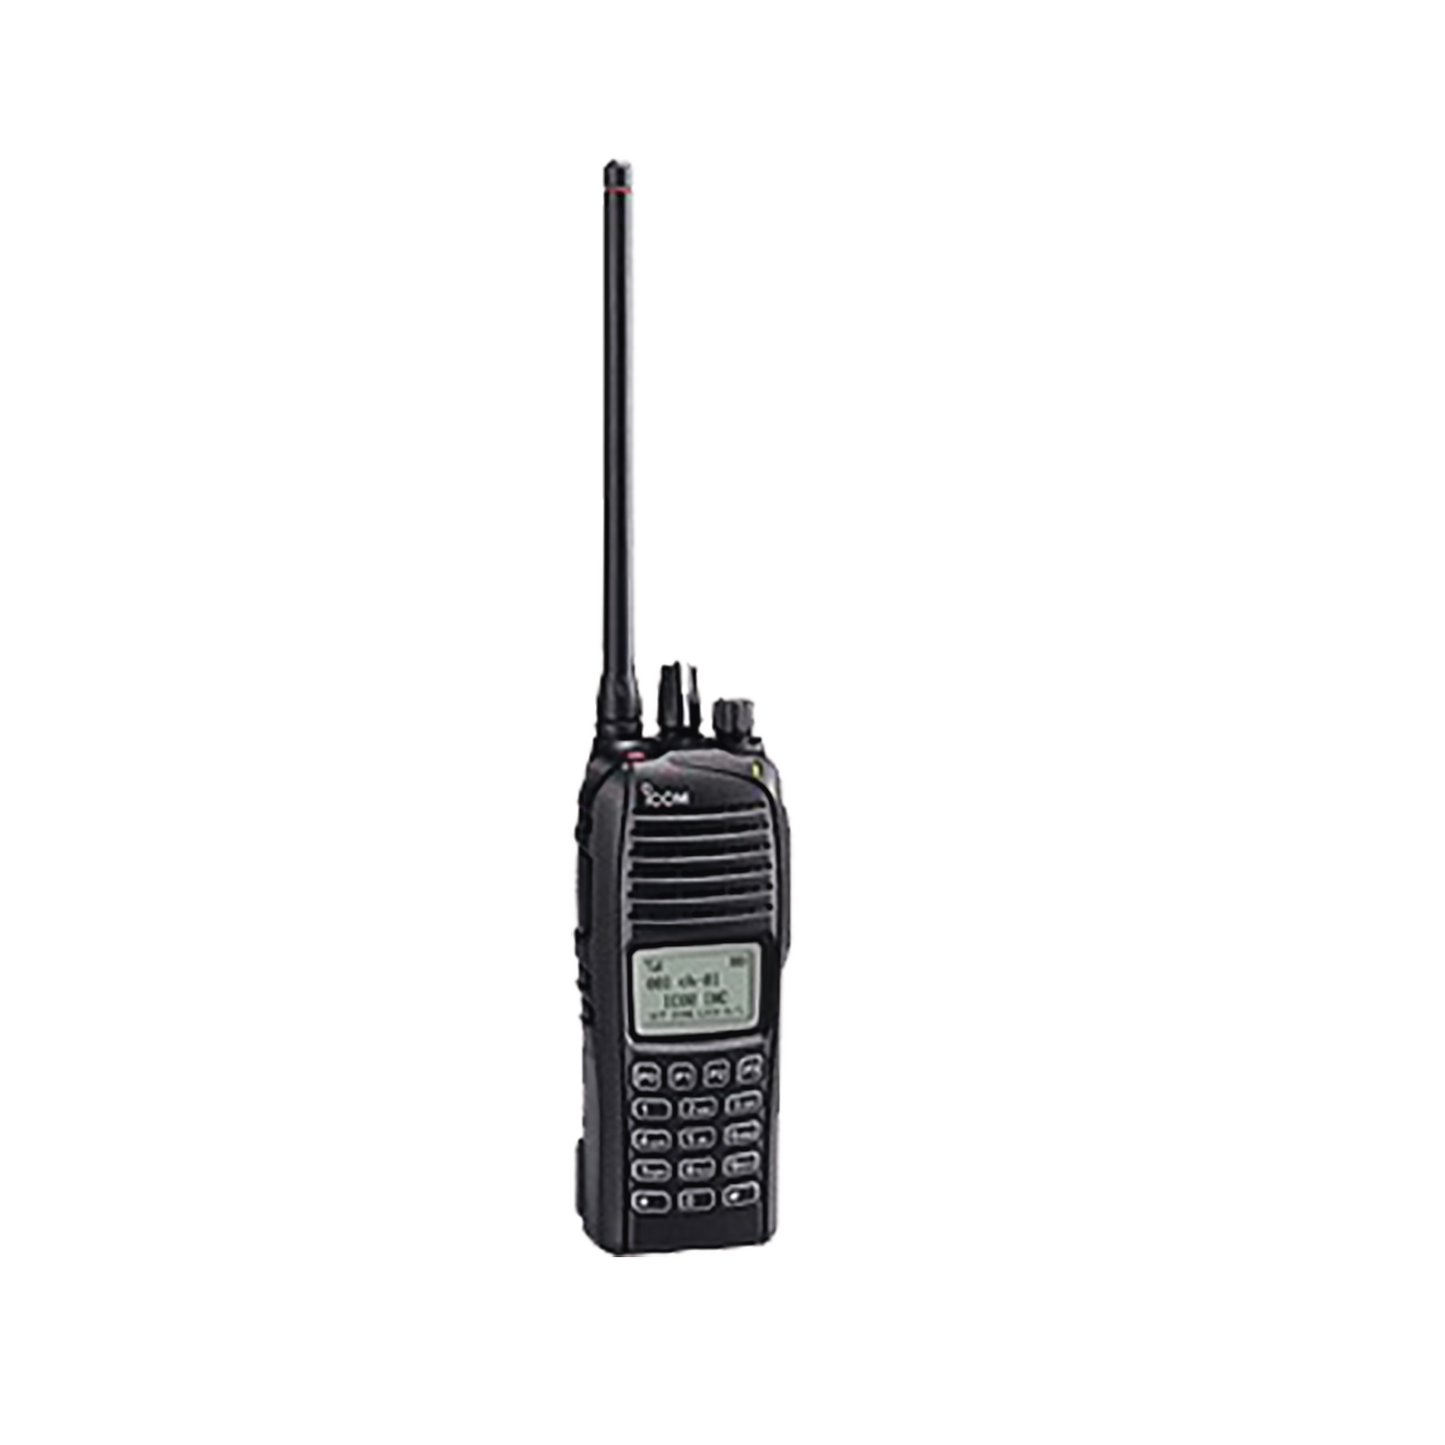 Portable Digital Radio 136-174 MHz, 512 Channels, 5 W Power, Version with Keypad DTMF with GPS. Supplied with Battery, Belt Clip, and Antenna.